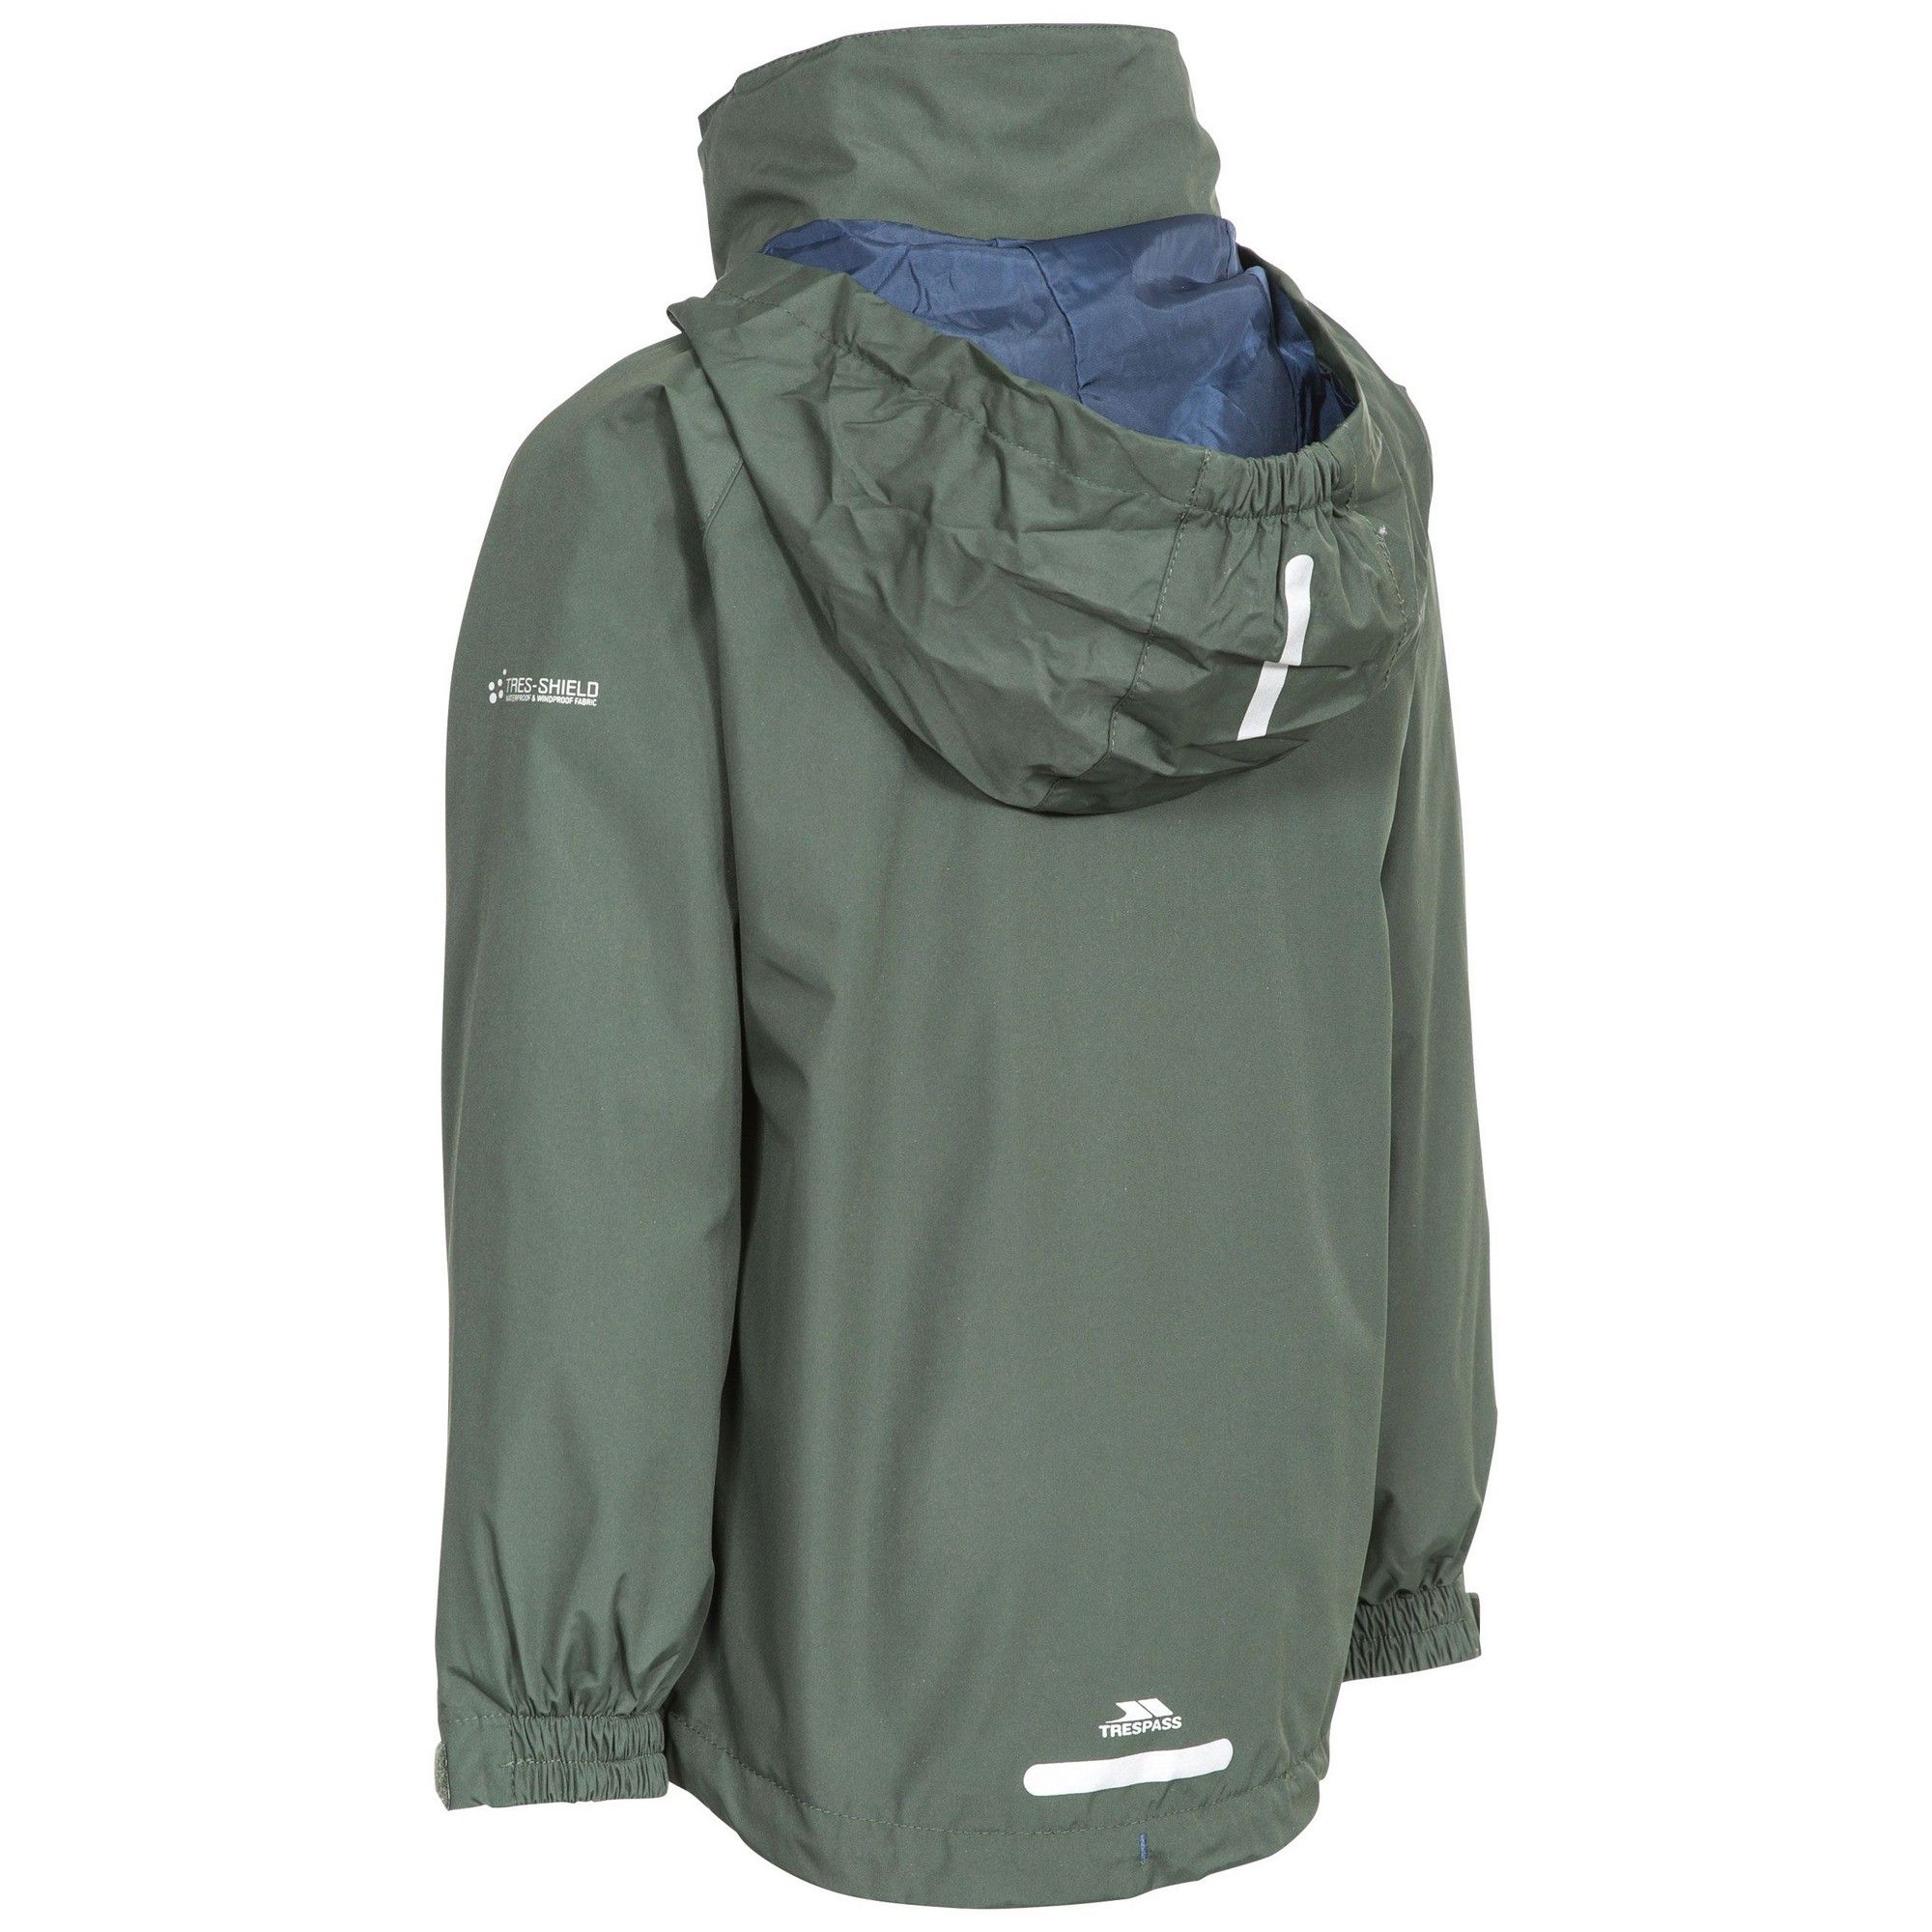 3 in 1 jacket. Concealed fold away hood in the collar. 2 zip pockets. Adjustable cuffs. Hem drawcord. Matching inner fleece jacket. Reflective piping. Waterproof 3000mm, windproof, taped seams. Shell: 100% Polyester Pongee PVC, Lining: 100% Polyester, Inner fleece: 100% Polyester. Trespass Childrens Chest Sizing (approx): 2/3 Years - 21in/53cm, 3/4 Years - 22in/56cm, 5/6 Years - 24in/61cm, 7/8 Years - 26in/66cm, 9/10 Years - 28in/71cm, 11/12 Years - 31in/79cm.